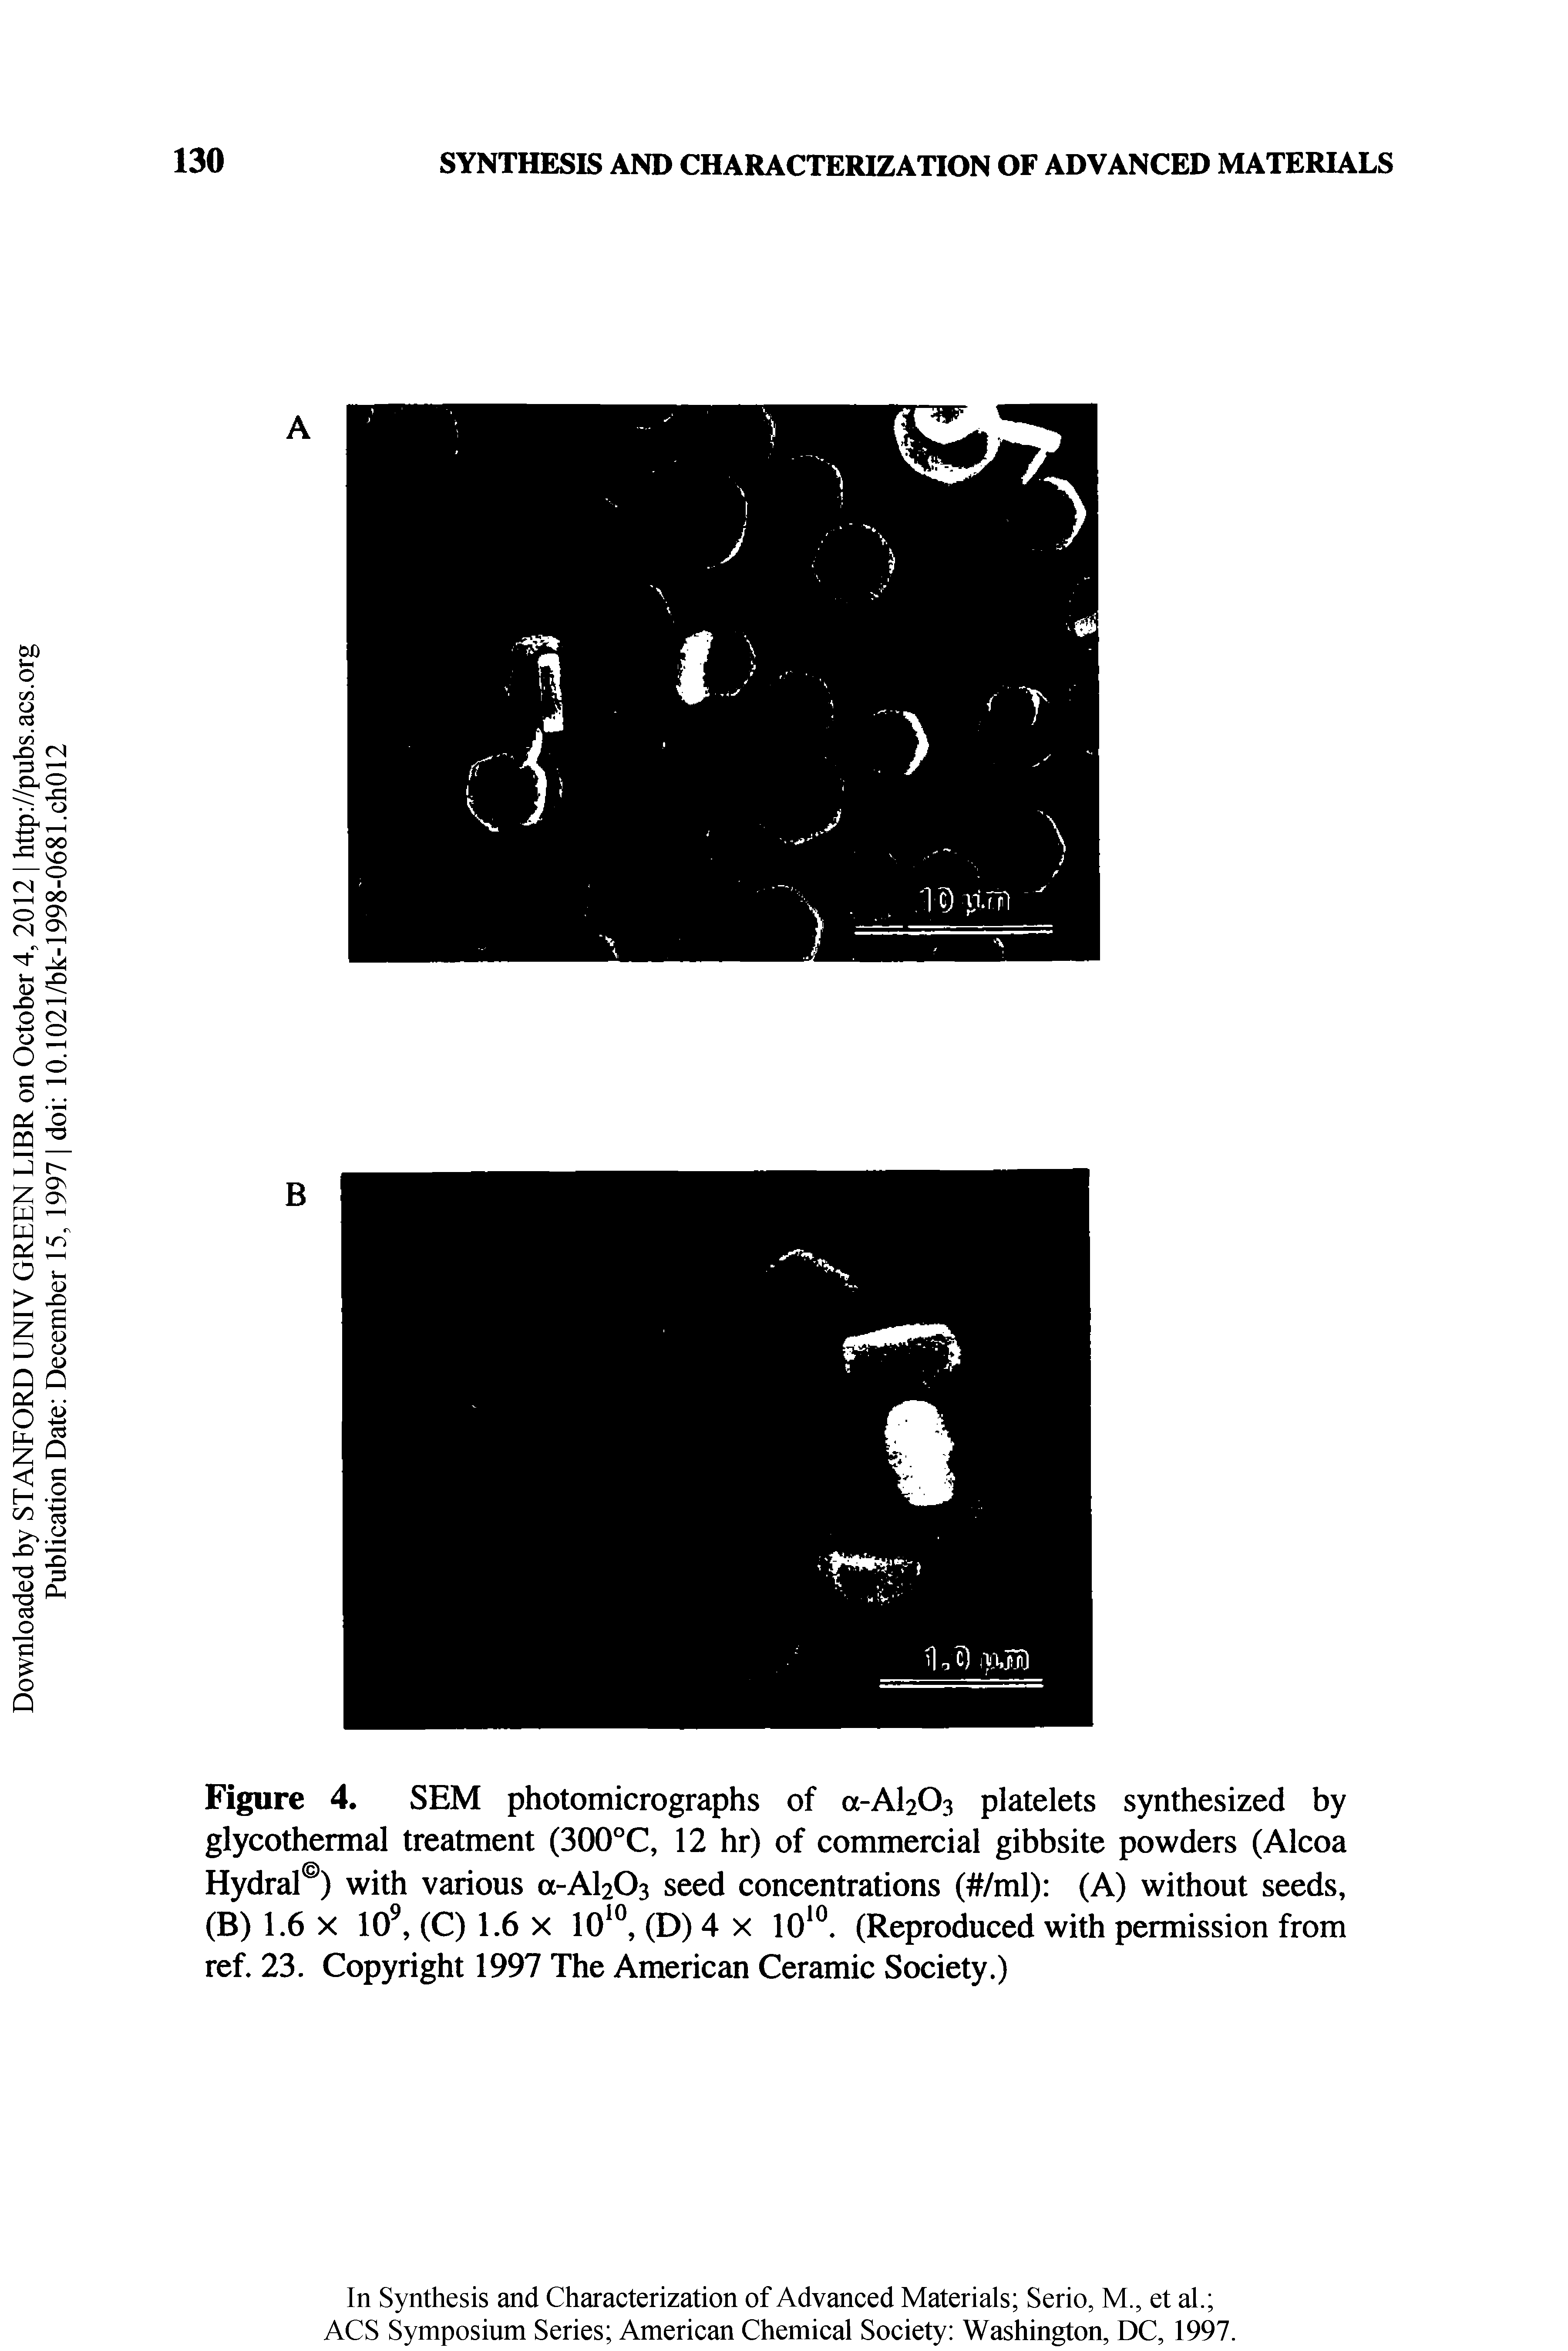 Figure 4. SEM photomicrographs of a-Al203 platelets synthesized by glycothermal treatment (300°C, 12 hr) of commercial gibbsite powders (Alcoa Hydral ) with various a-Al203 seed concentrations ( /ml) (A) without seeds, (B) 1.6 X 10, (C) 1.6 X 10 °, (D) 4 x 10 . (Reproduced with permission from ref. 23. Copyright 1997 The American Ceramic Society.)...